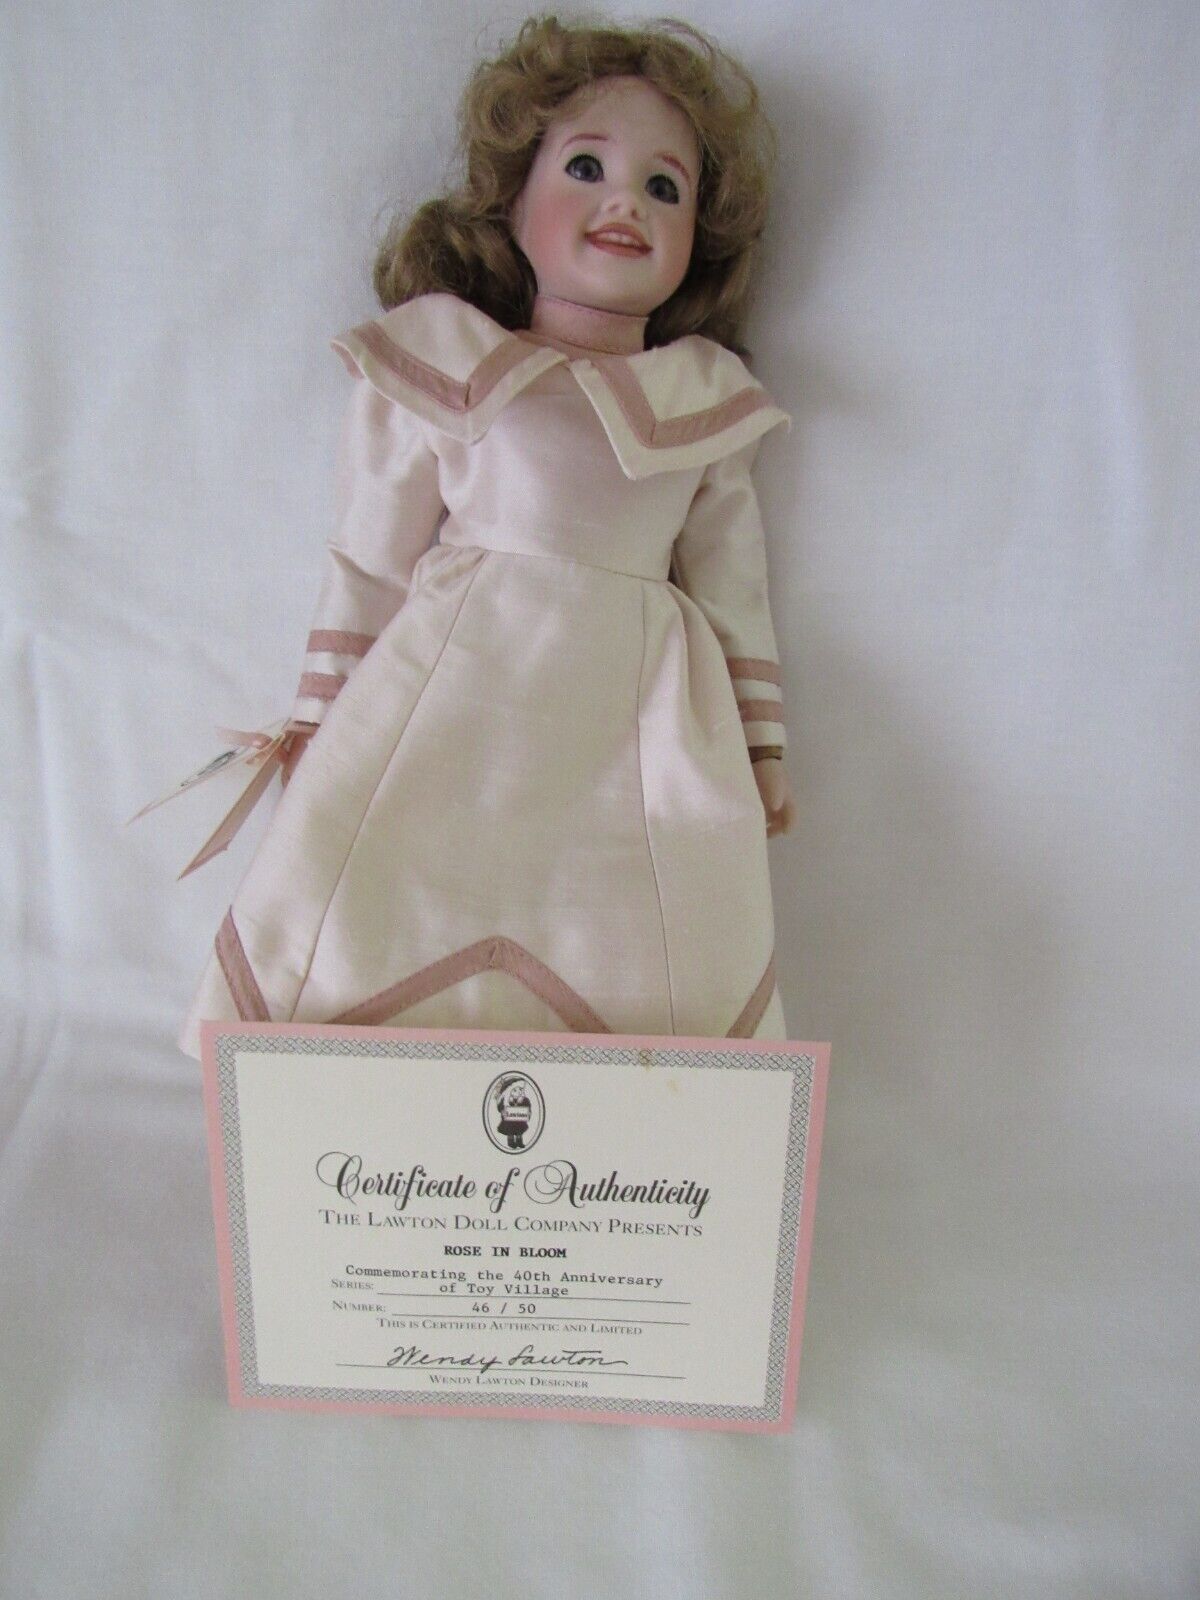 RARE WENDY LAWTON DOLL Rose In Bloom w/ Accessories Limited Edition 46/50 Cert